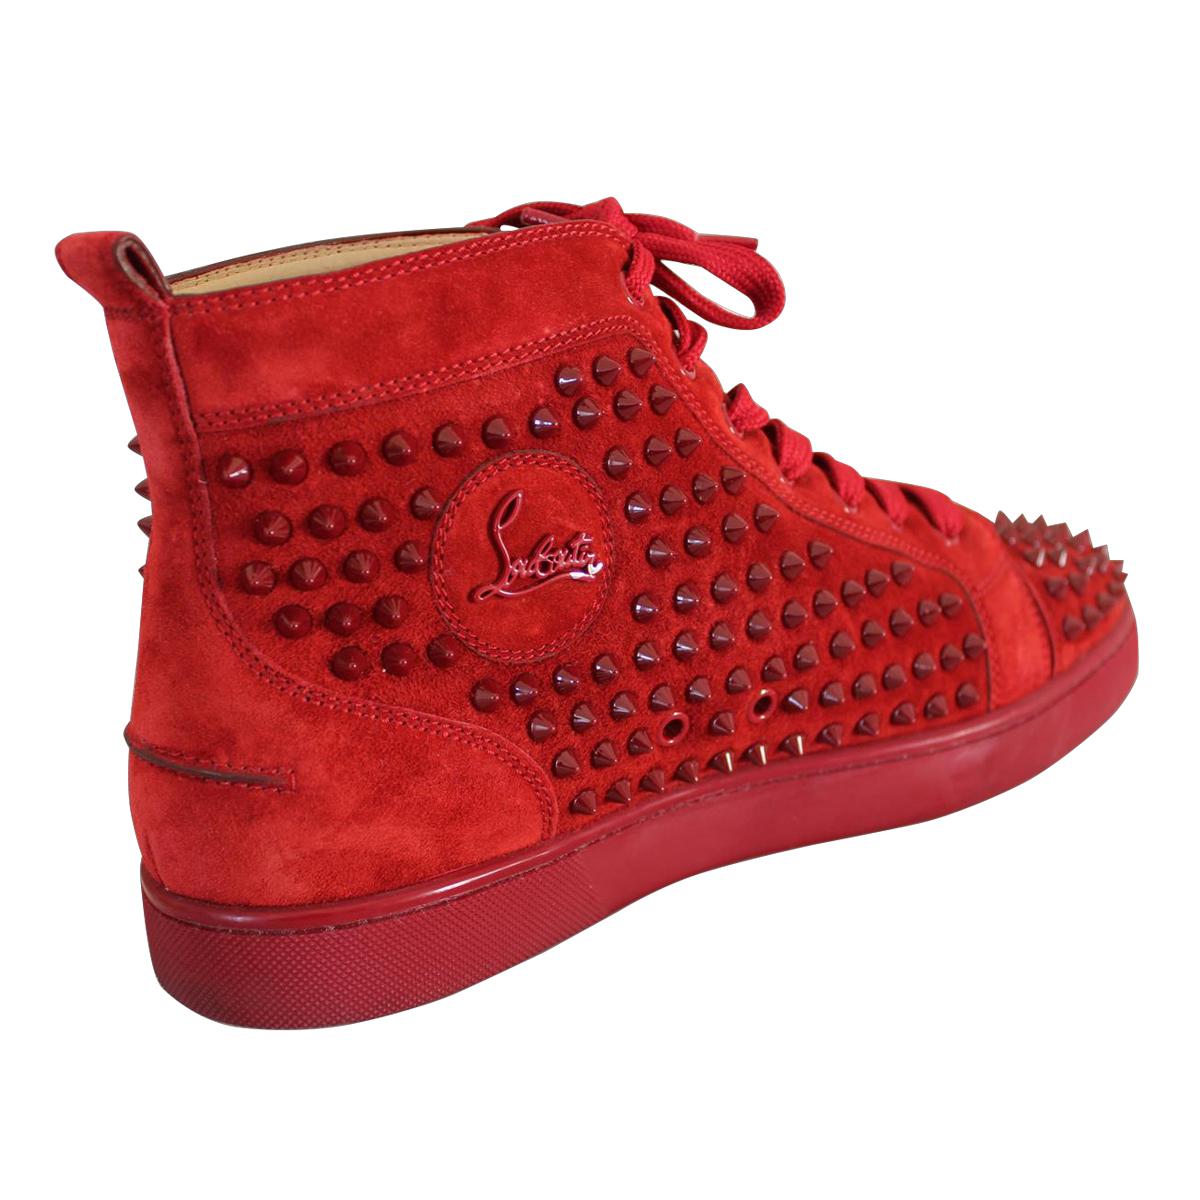 Crazy and super Louboutin's men sneakers
Suede
Red color
Decorated with a covering of tonal signature spikes 
Laced
Original price € 1200
Worldwide express shipping included in the price !